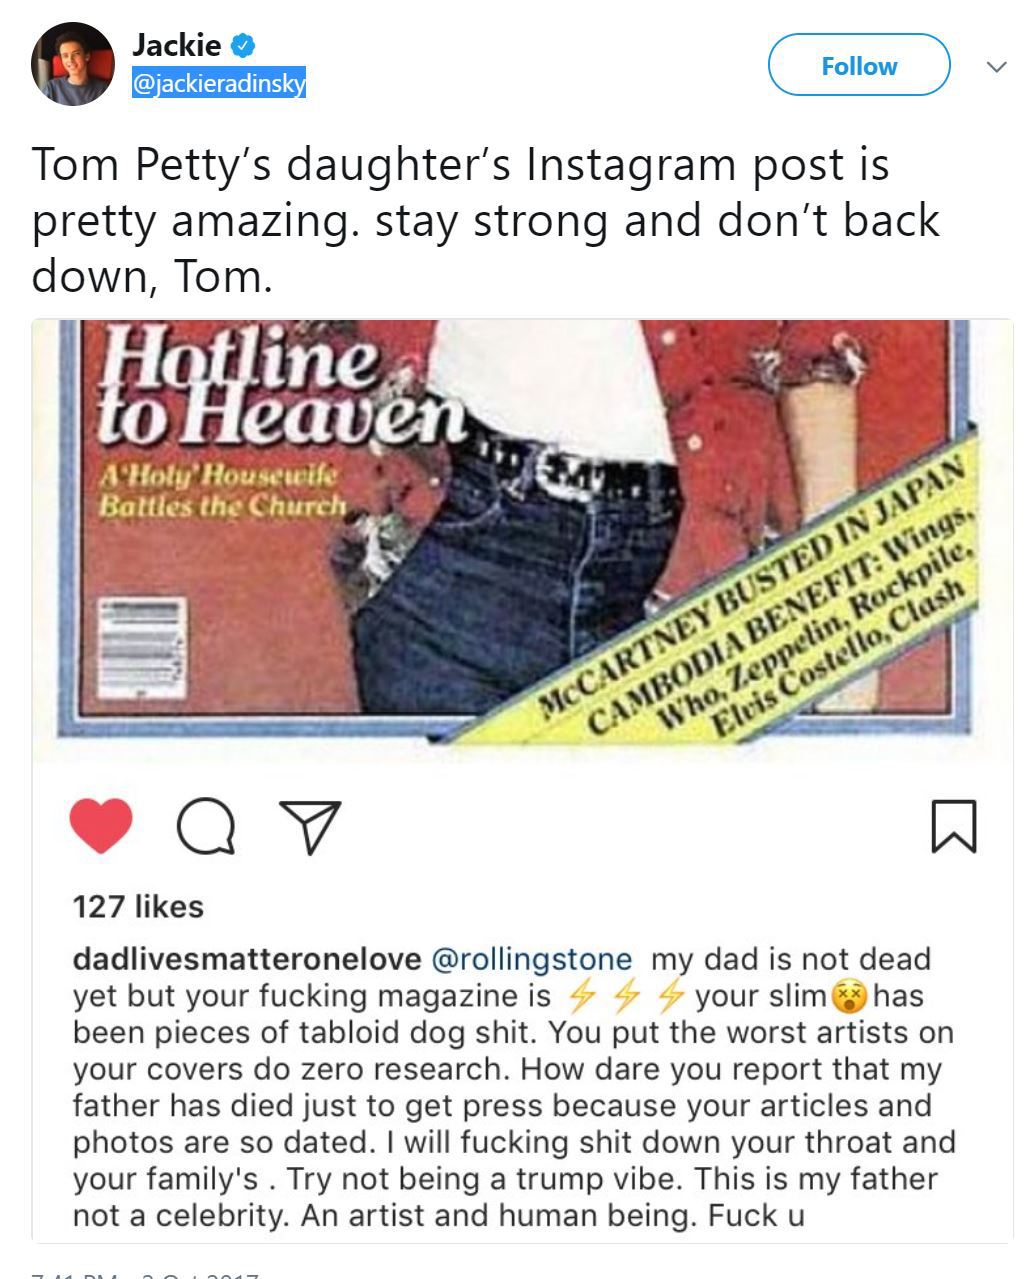 Instagram post purportedly from Tom Petty's daughter tearing strip of Rolling Stone and TMZ by inference since they reported the story first.